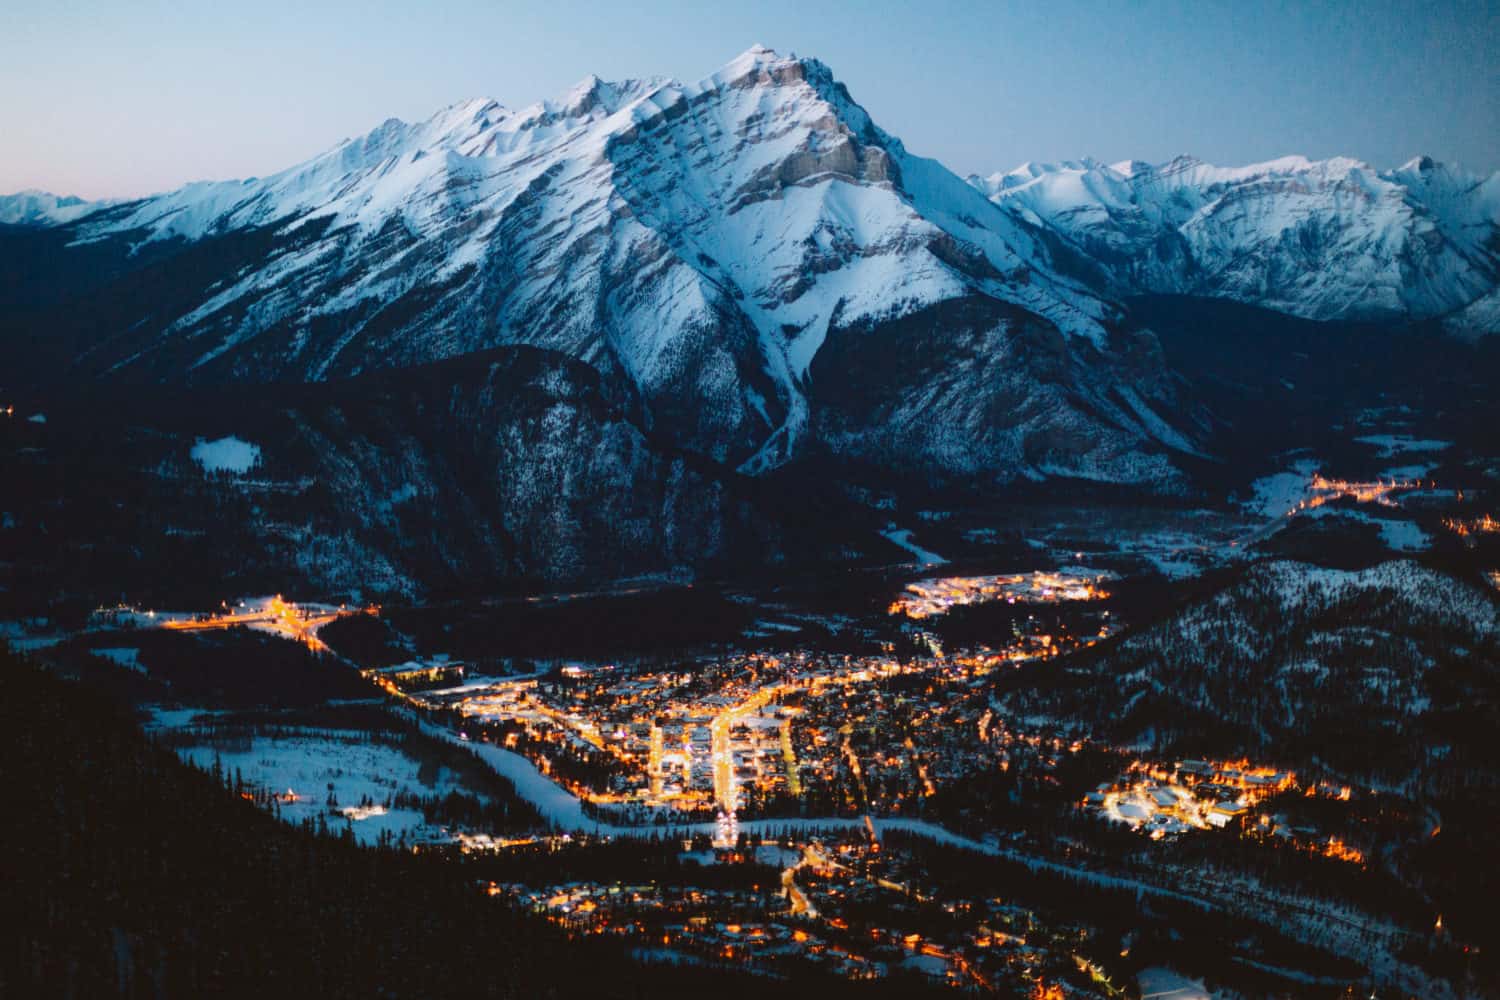 View of Banff, Canada from Sulphur Mountain - Image Property of TheMandagies.com